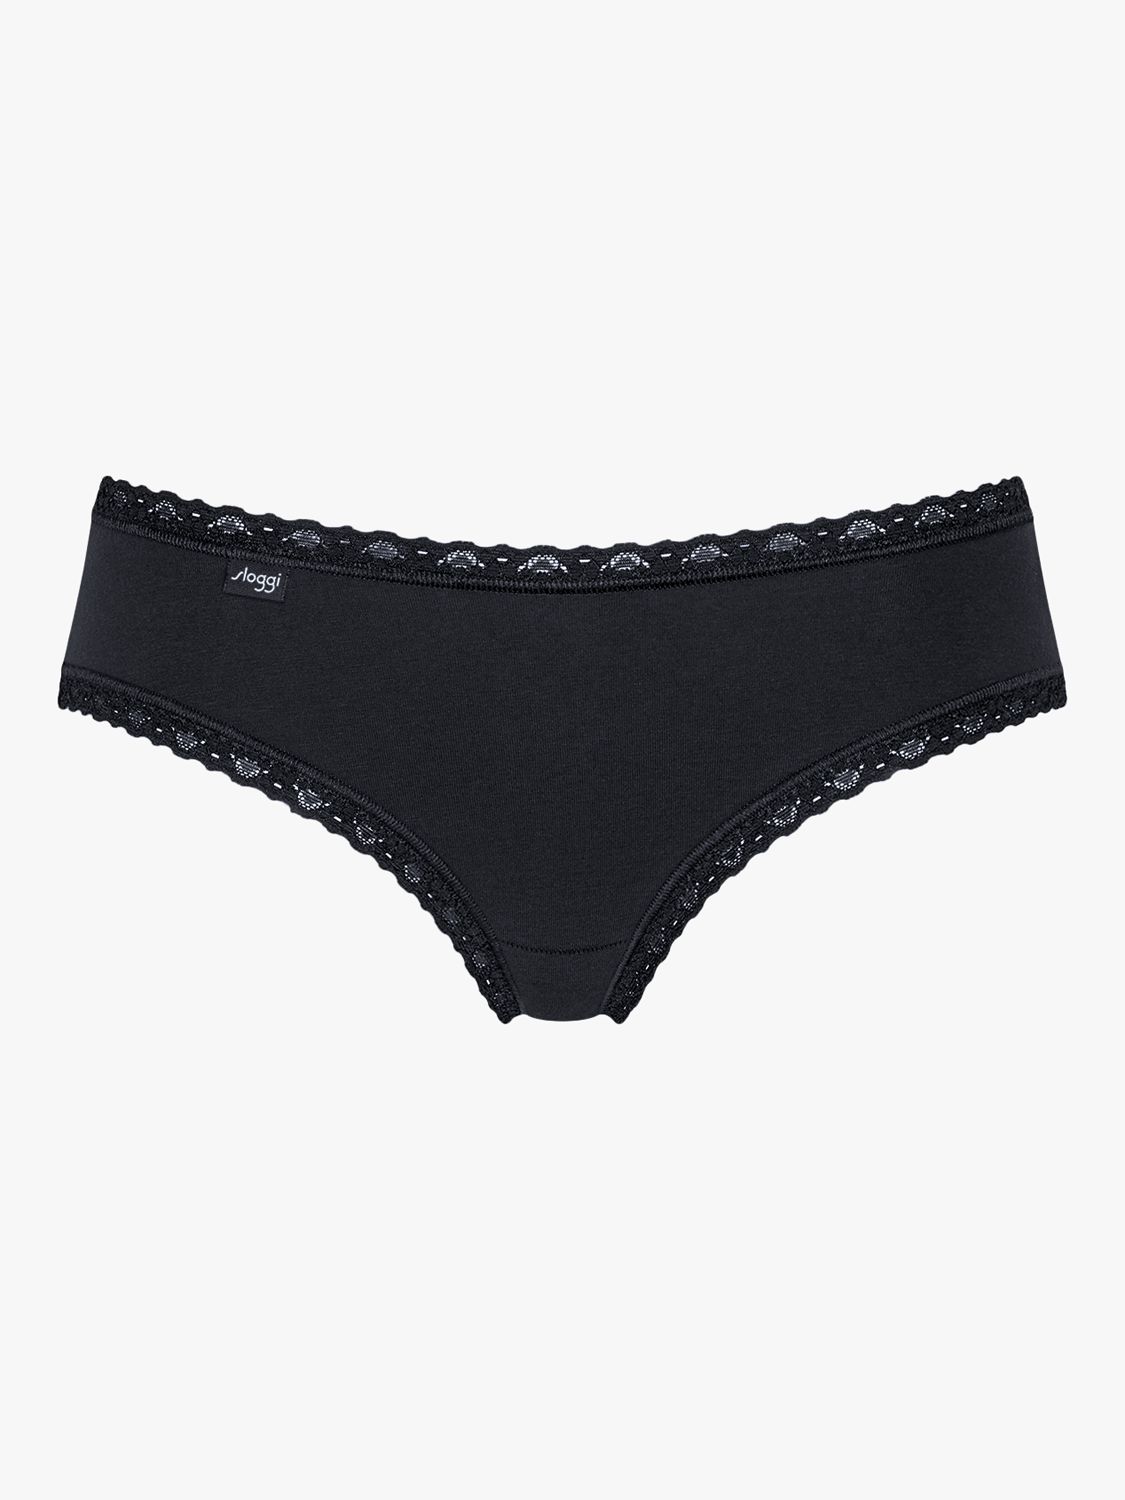 sloggi 24/7 Weekend Hipster Knickers, Pack of 3, Black Combination, 8